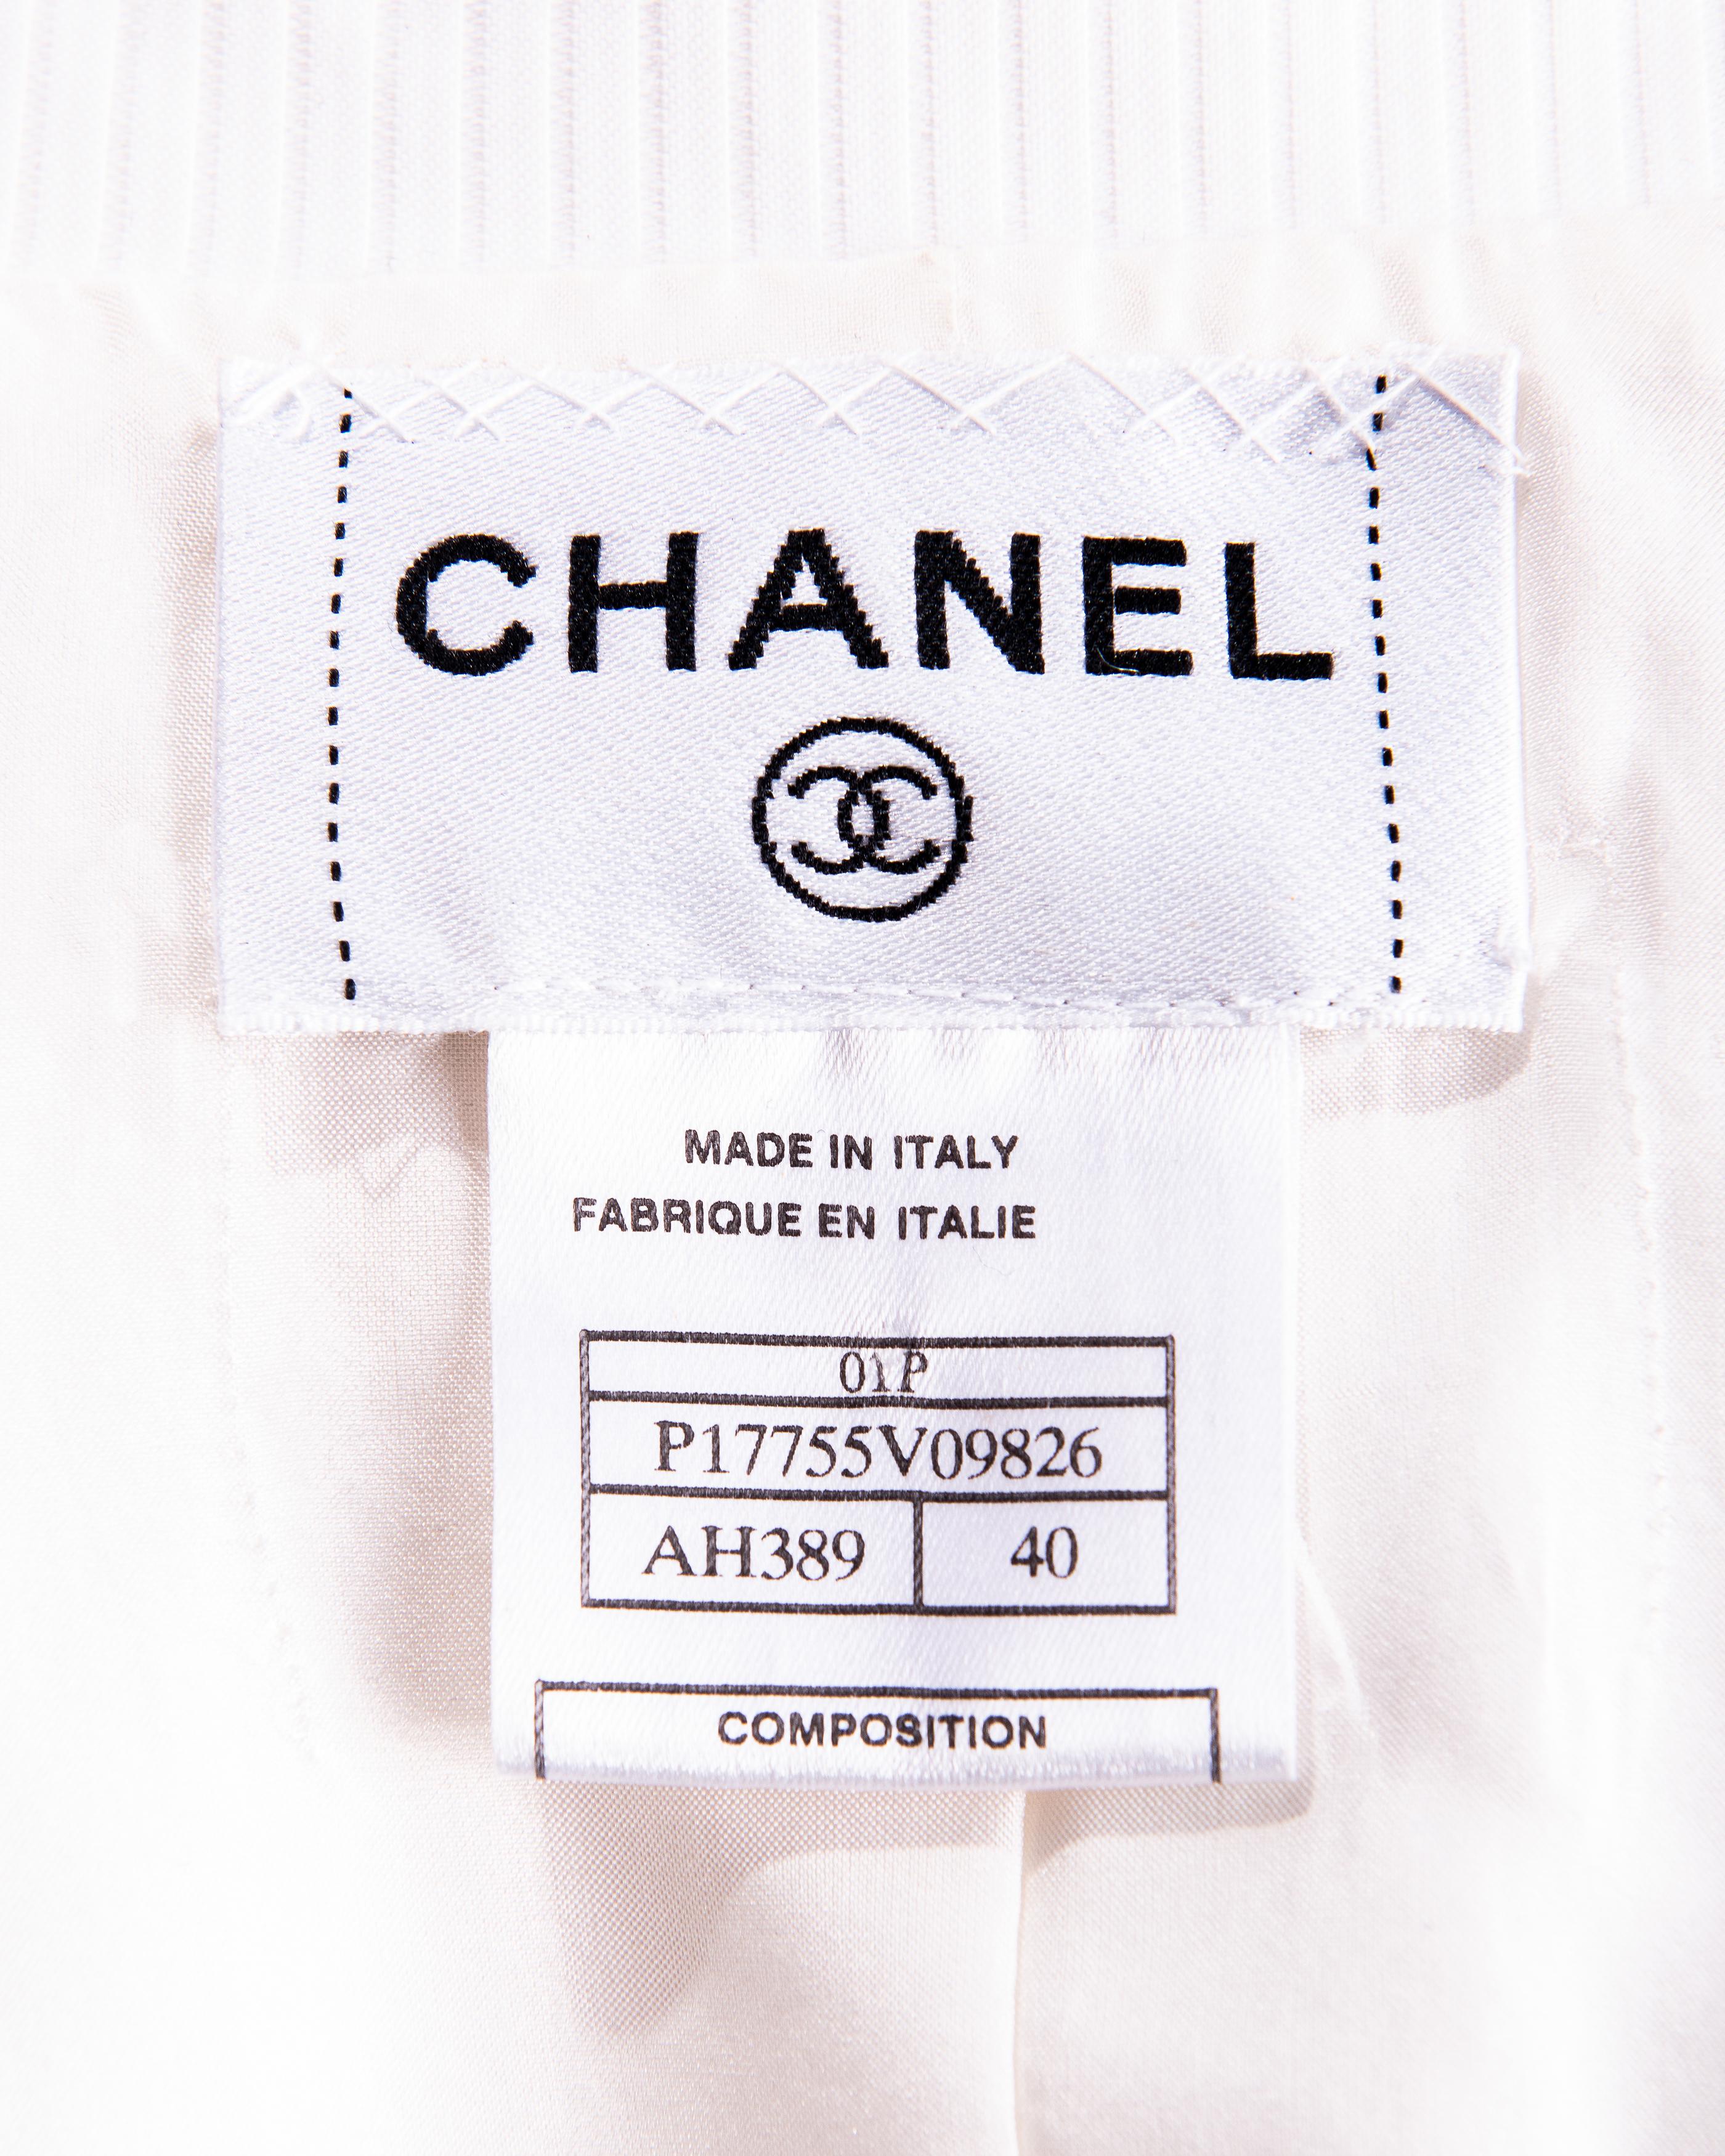 S/S 2001 Chanel Double-Breasted White Suit Set 10